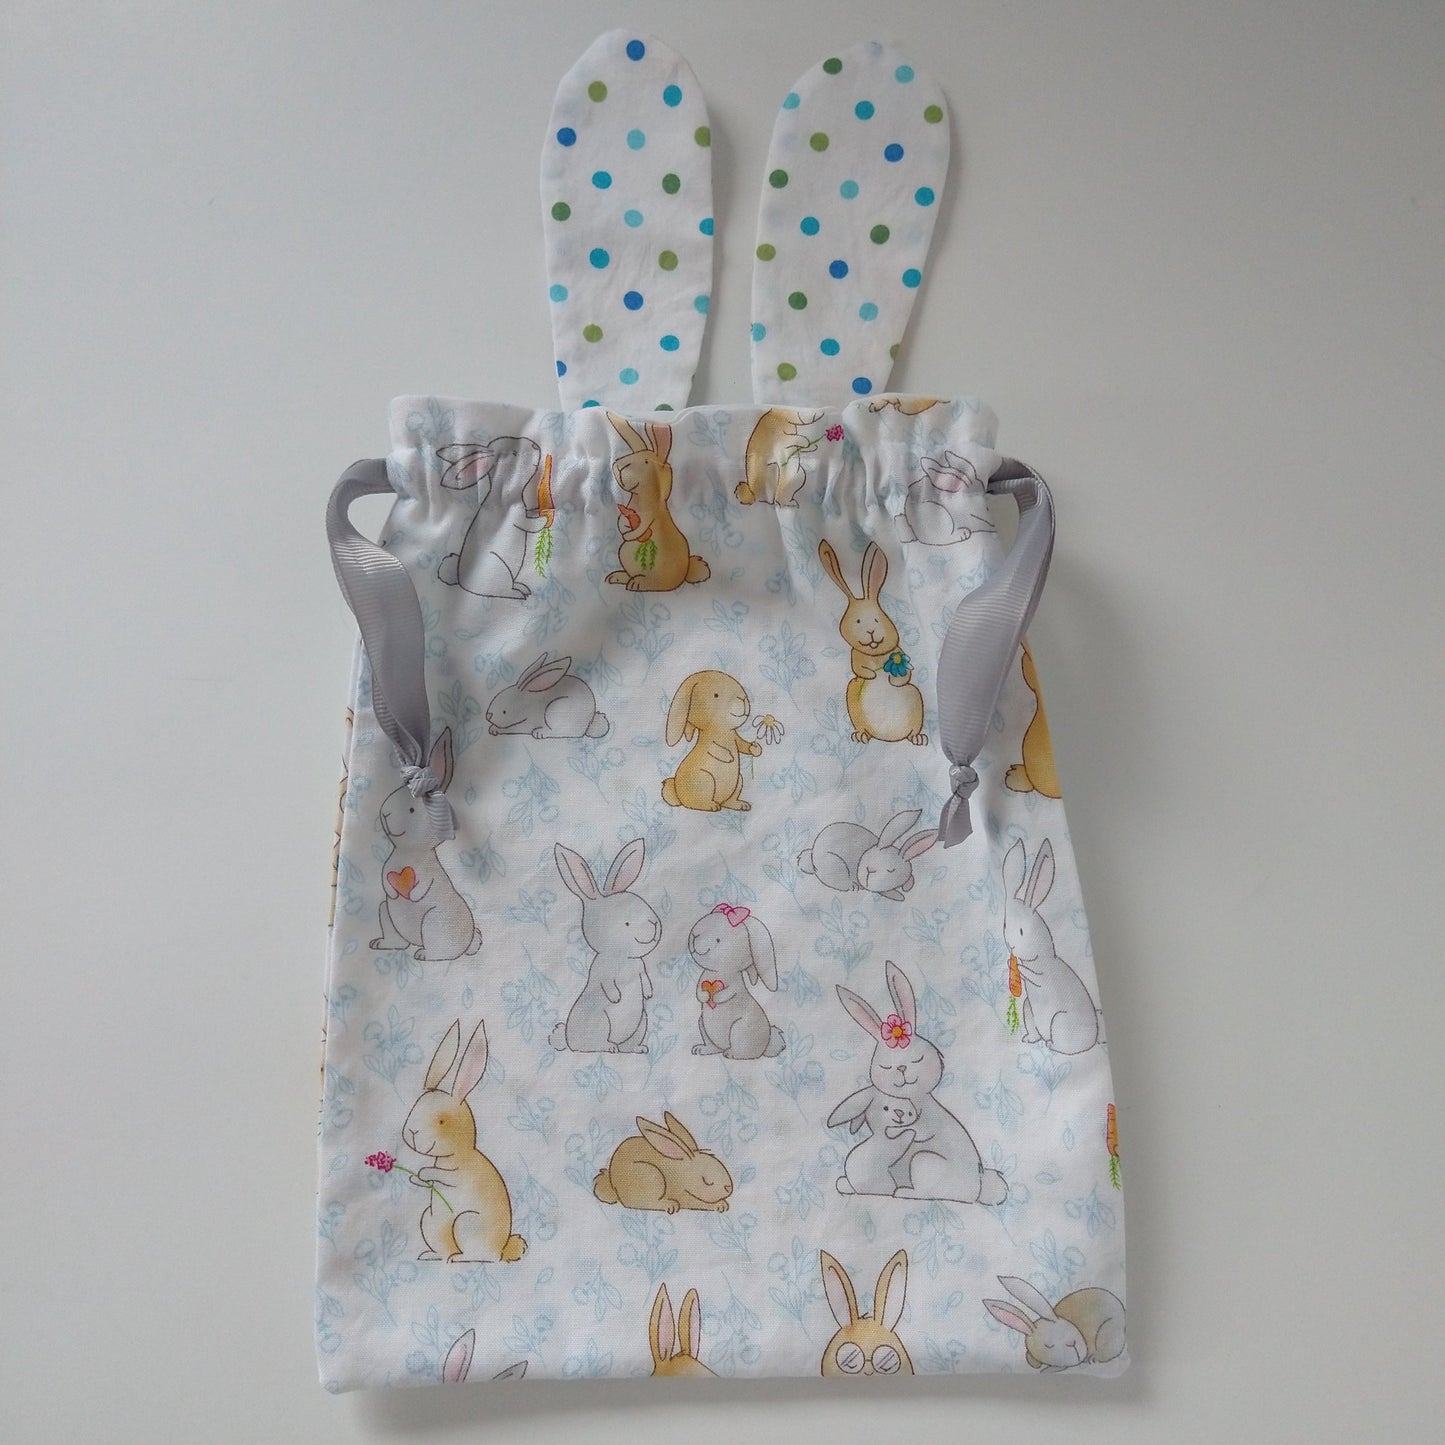 Easter treat bags, handmade and reusable, white bunny green dots, size medium